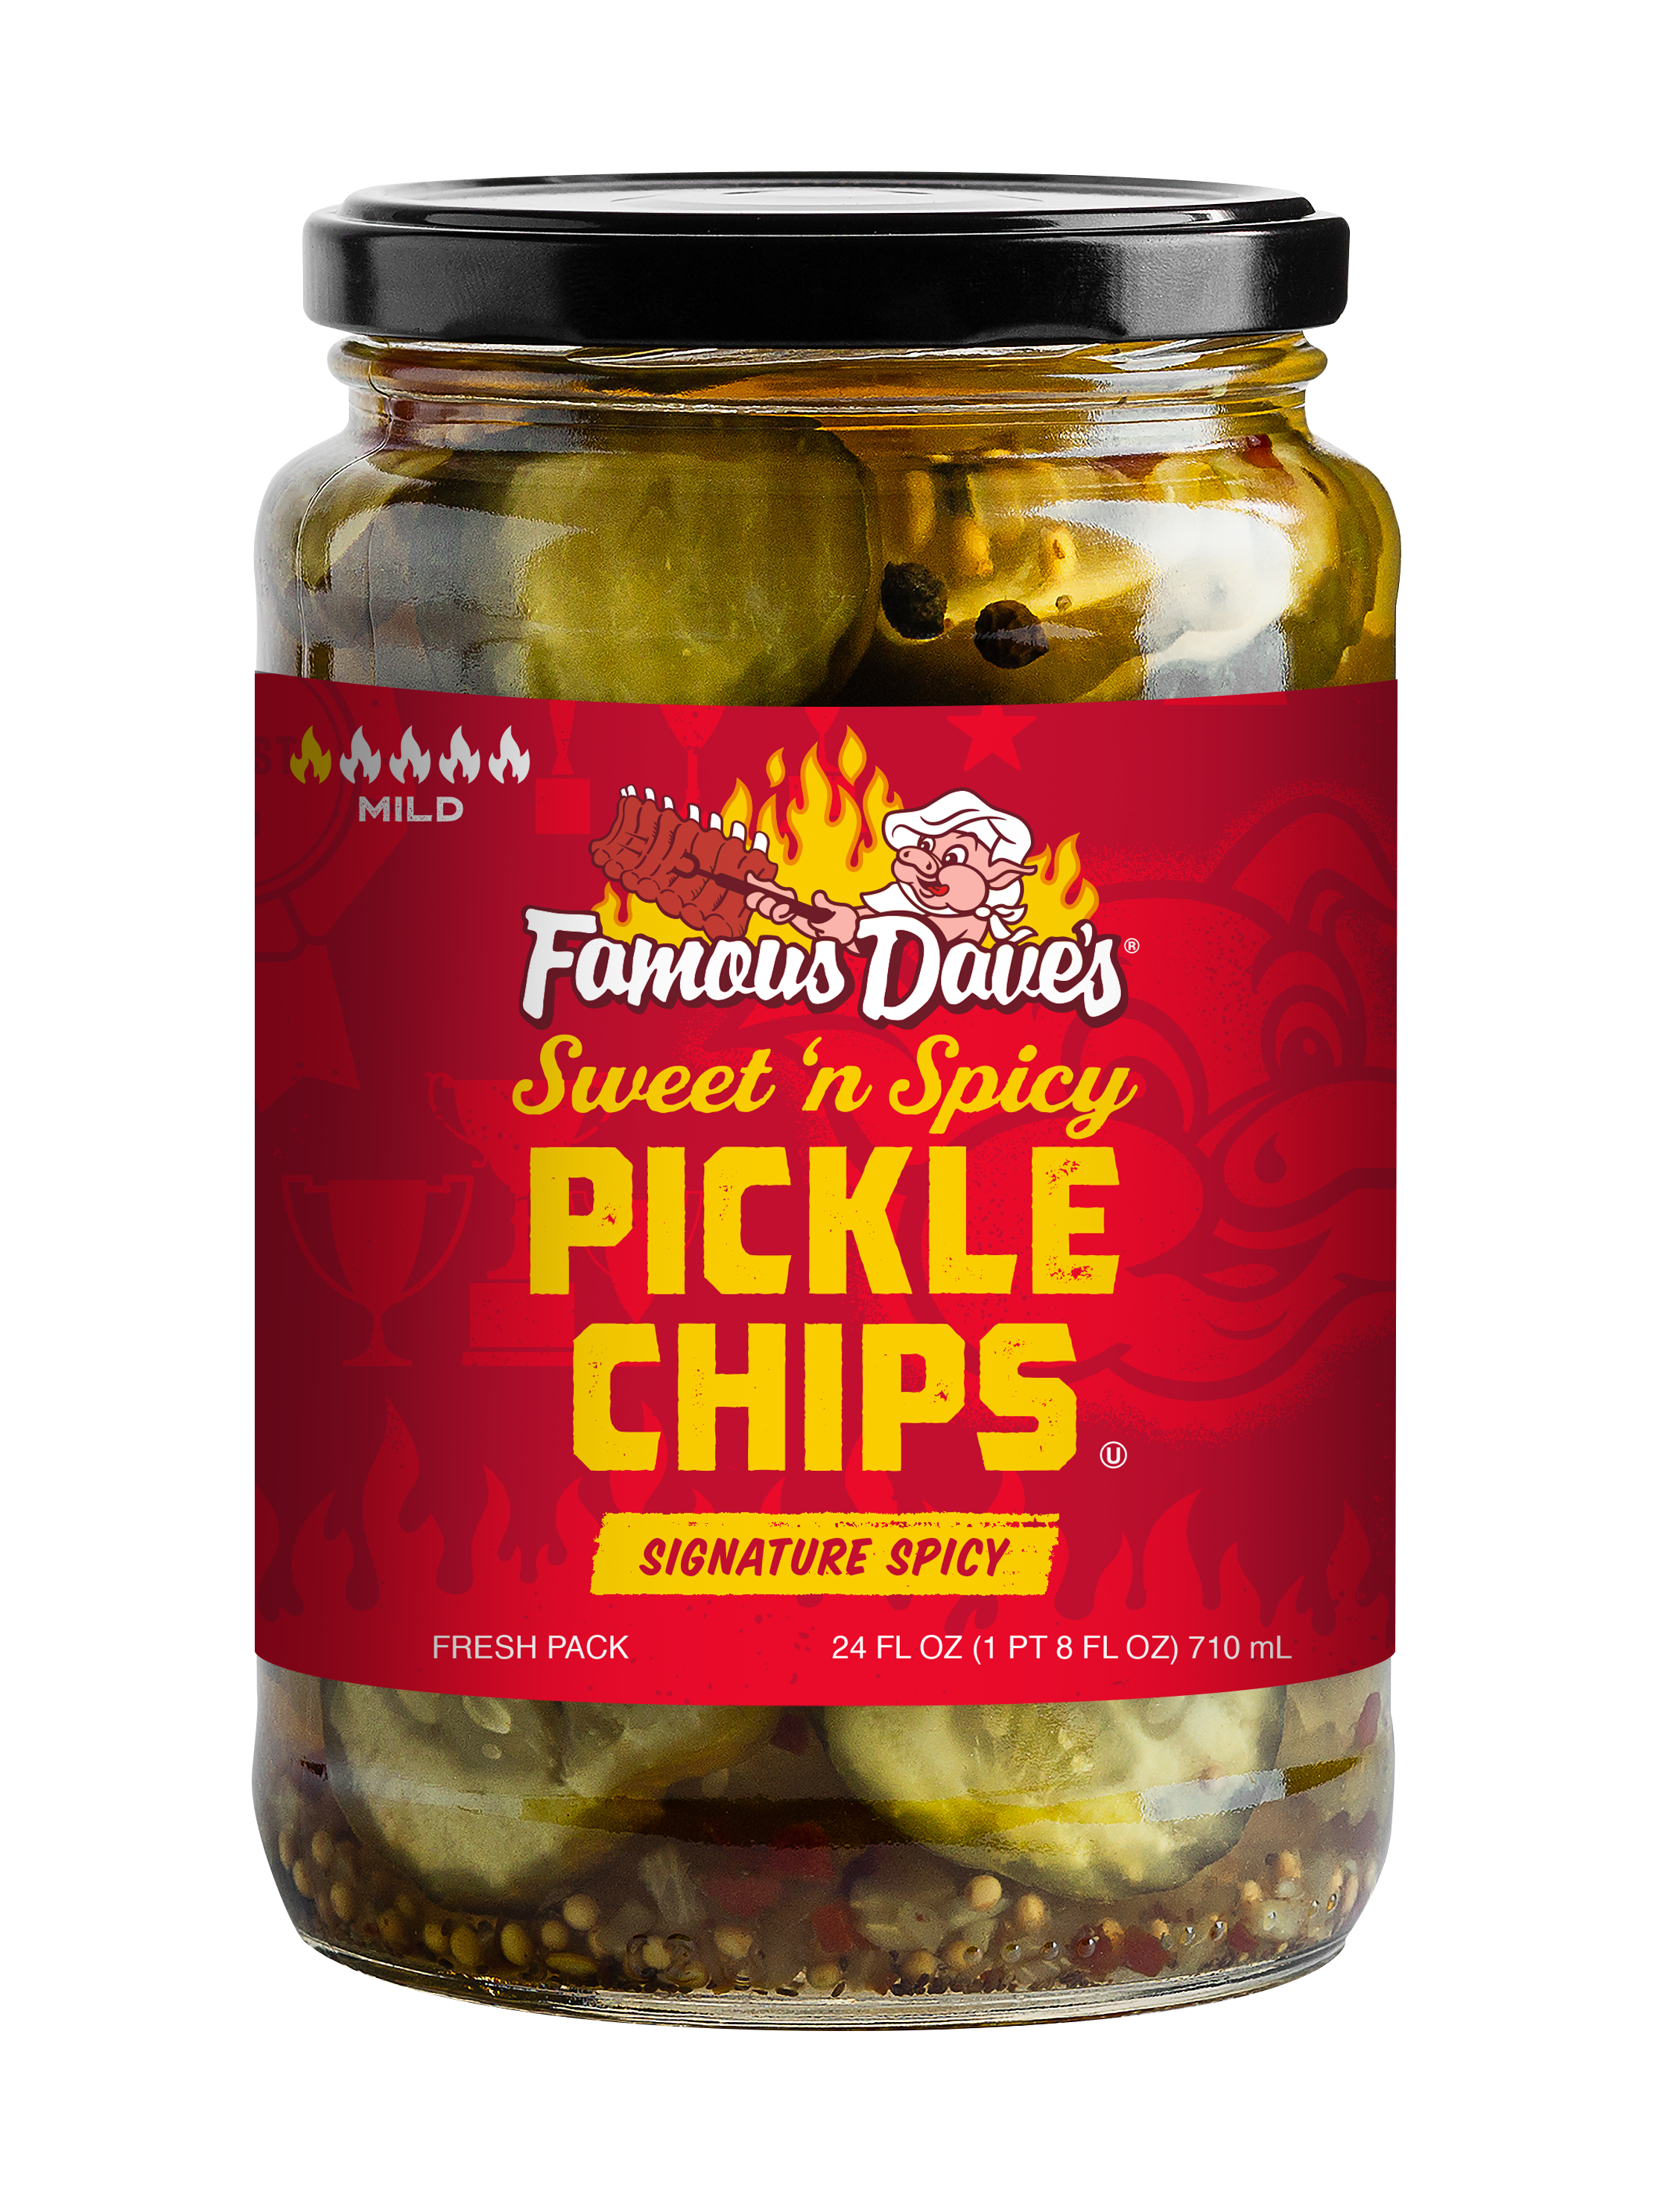 Famous Dave's Sweet 'N Spicy Pickle Chips, 24 fl oz Jar - image 1 of 10